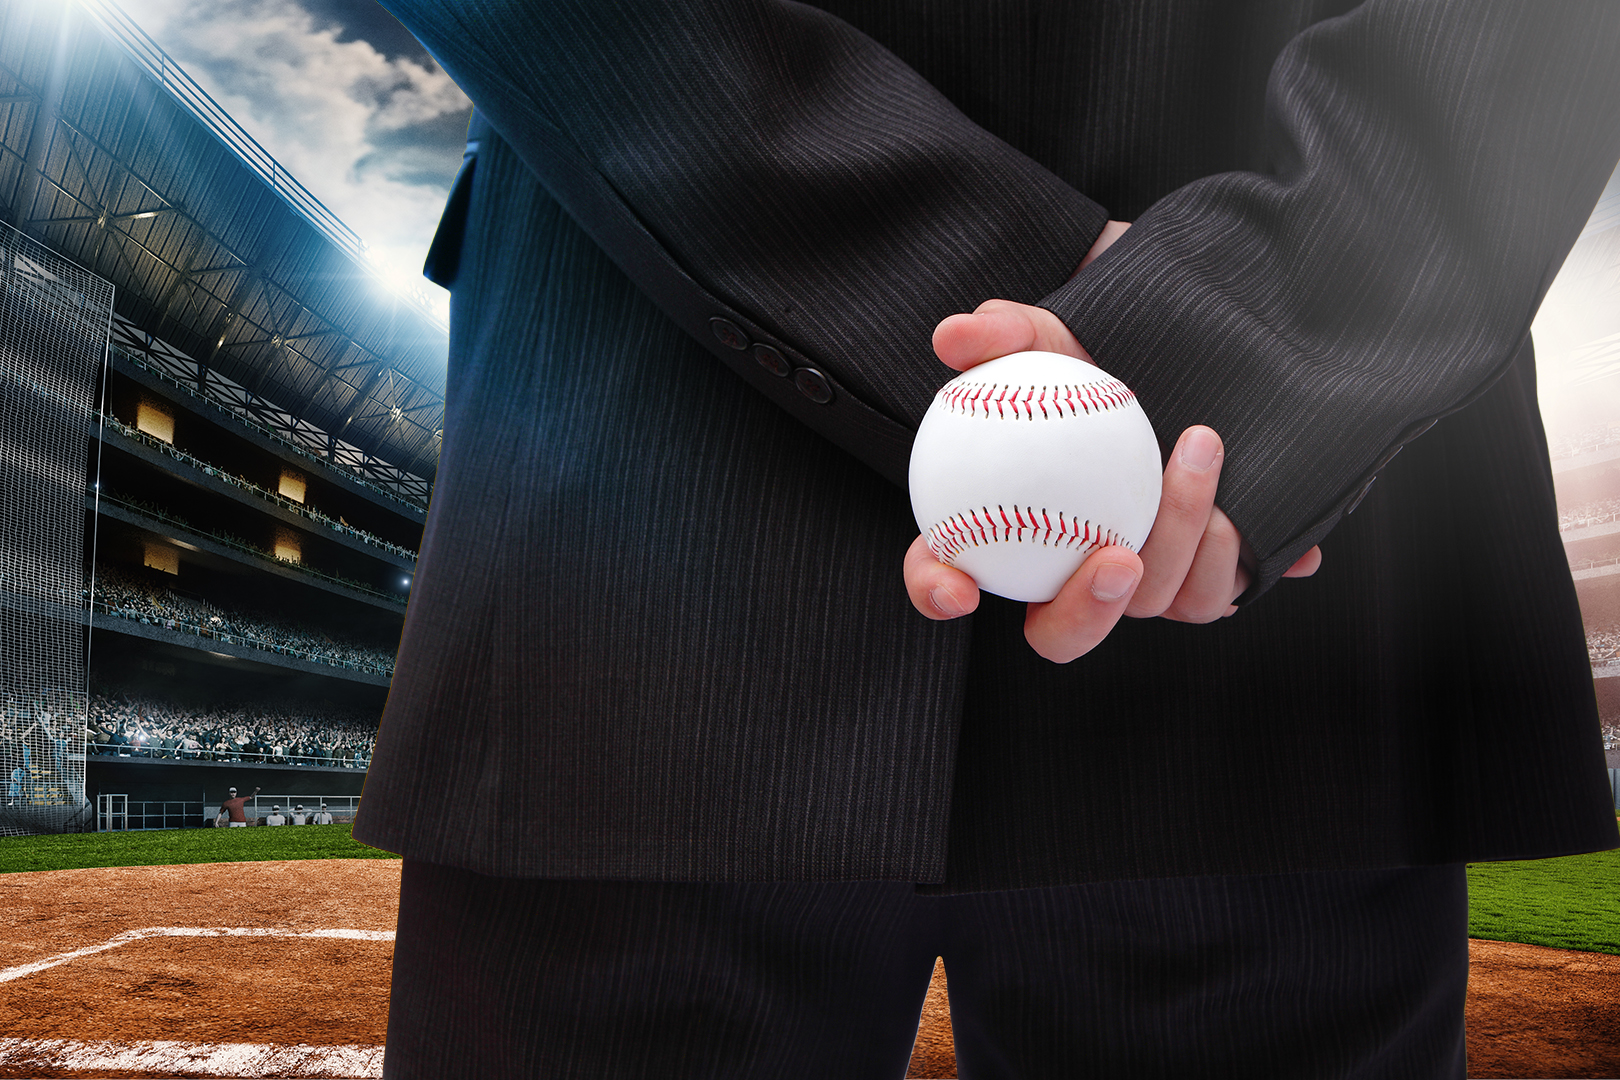 A photo of person in a suit standing in a baseball stadium, focused on their hands holding a baseball.